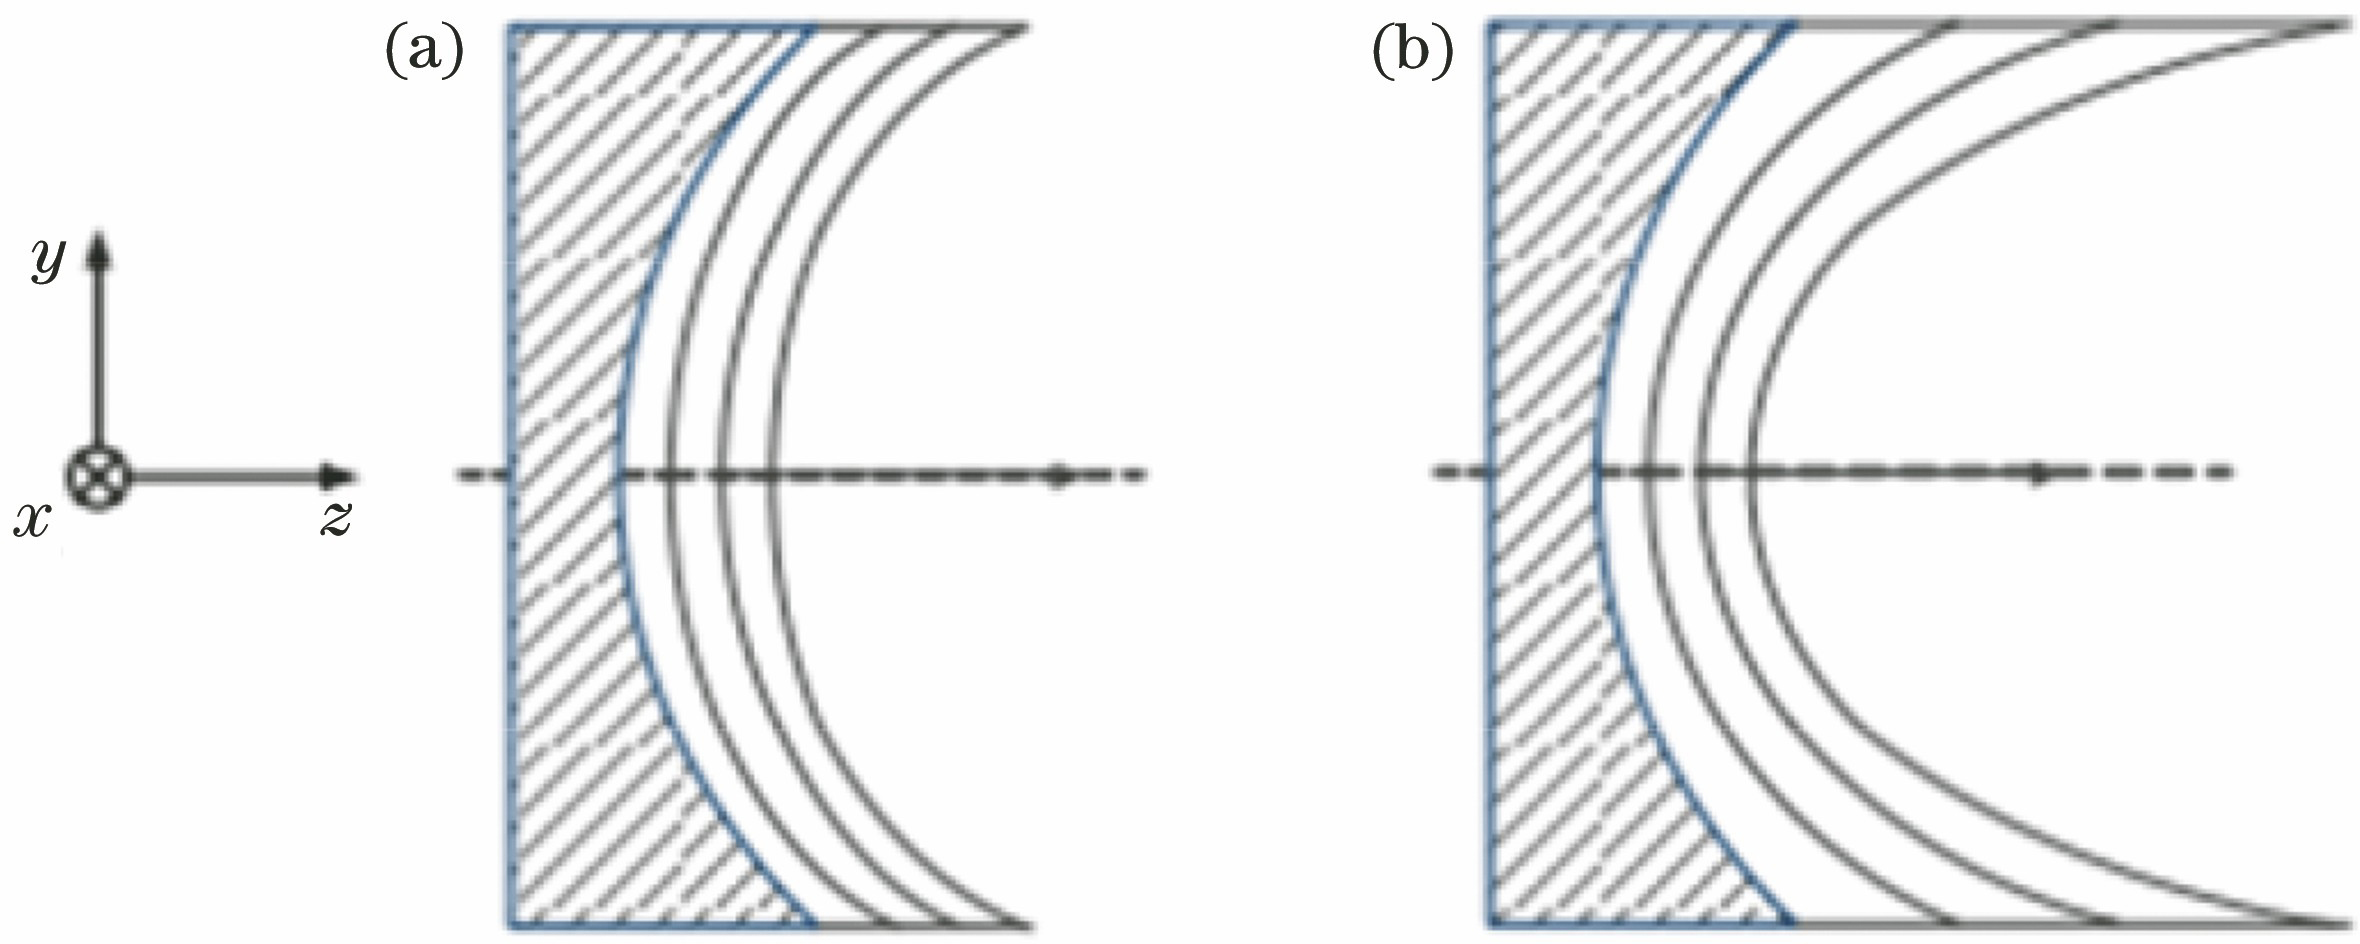 Thickness distribution of multilayer films. (a) Regular multilayer films; (b) laterally graded multilayer films